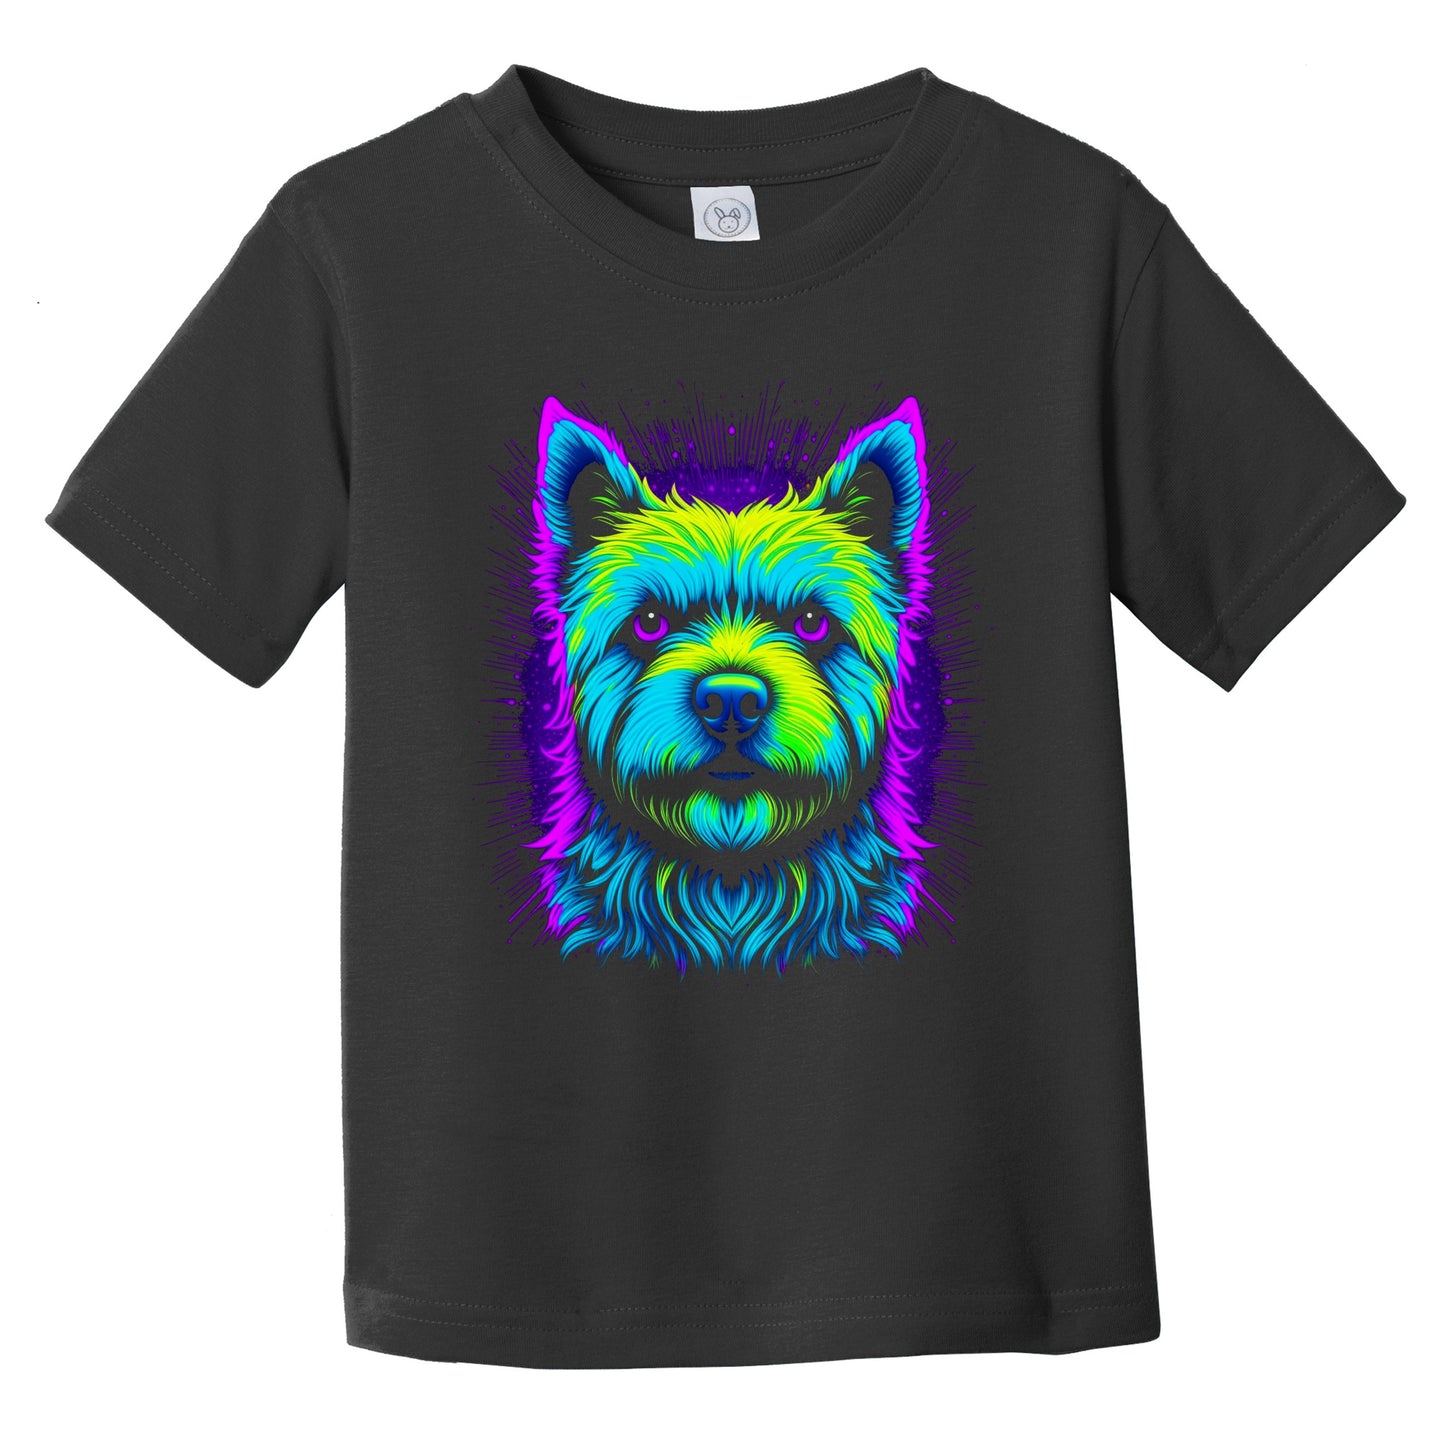 Colorful Bright Westie Vibrant Psychedelic Dog Art Infant Toddler T-Shirt